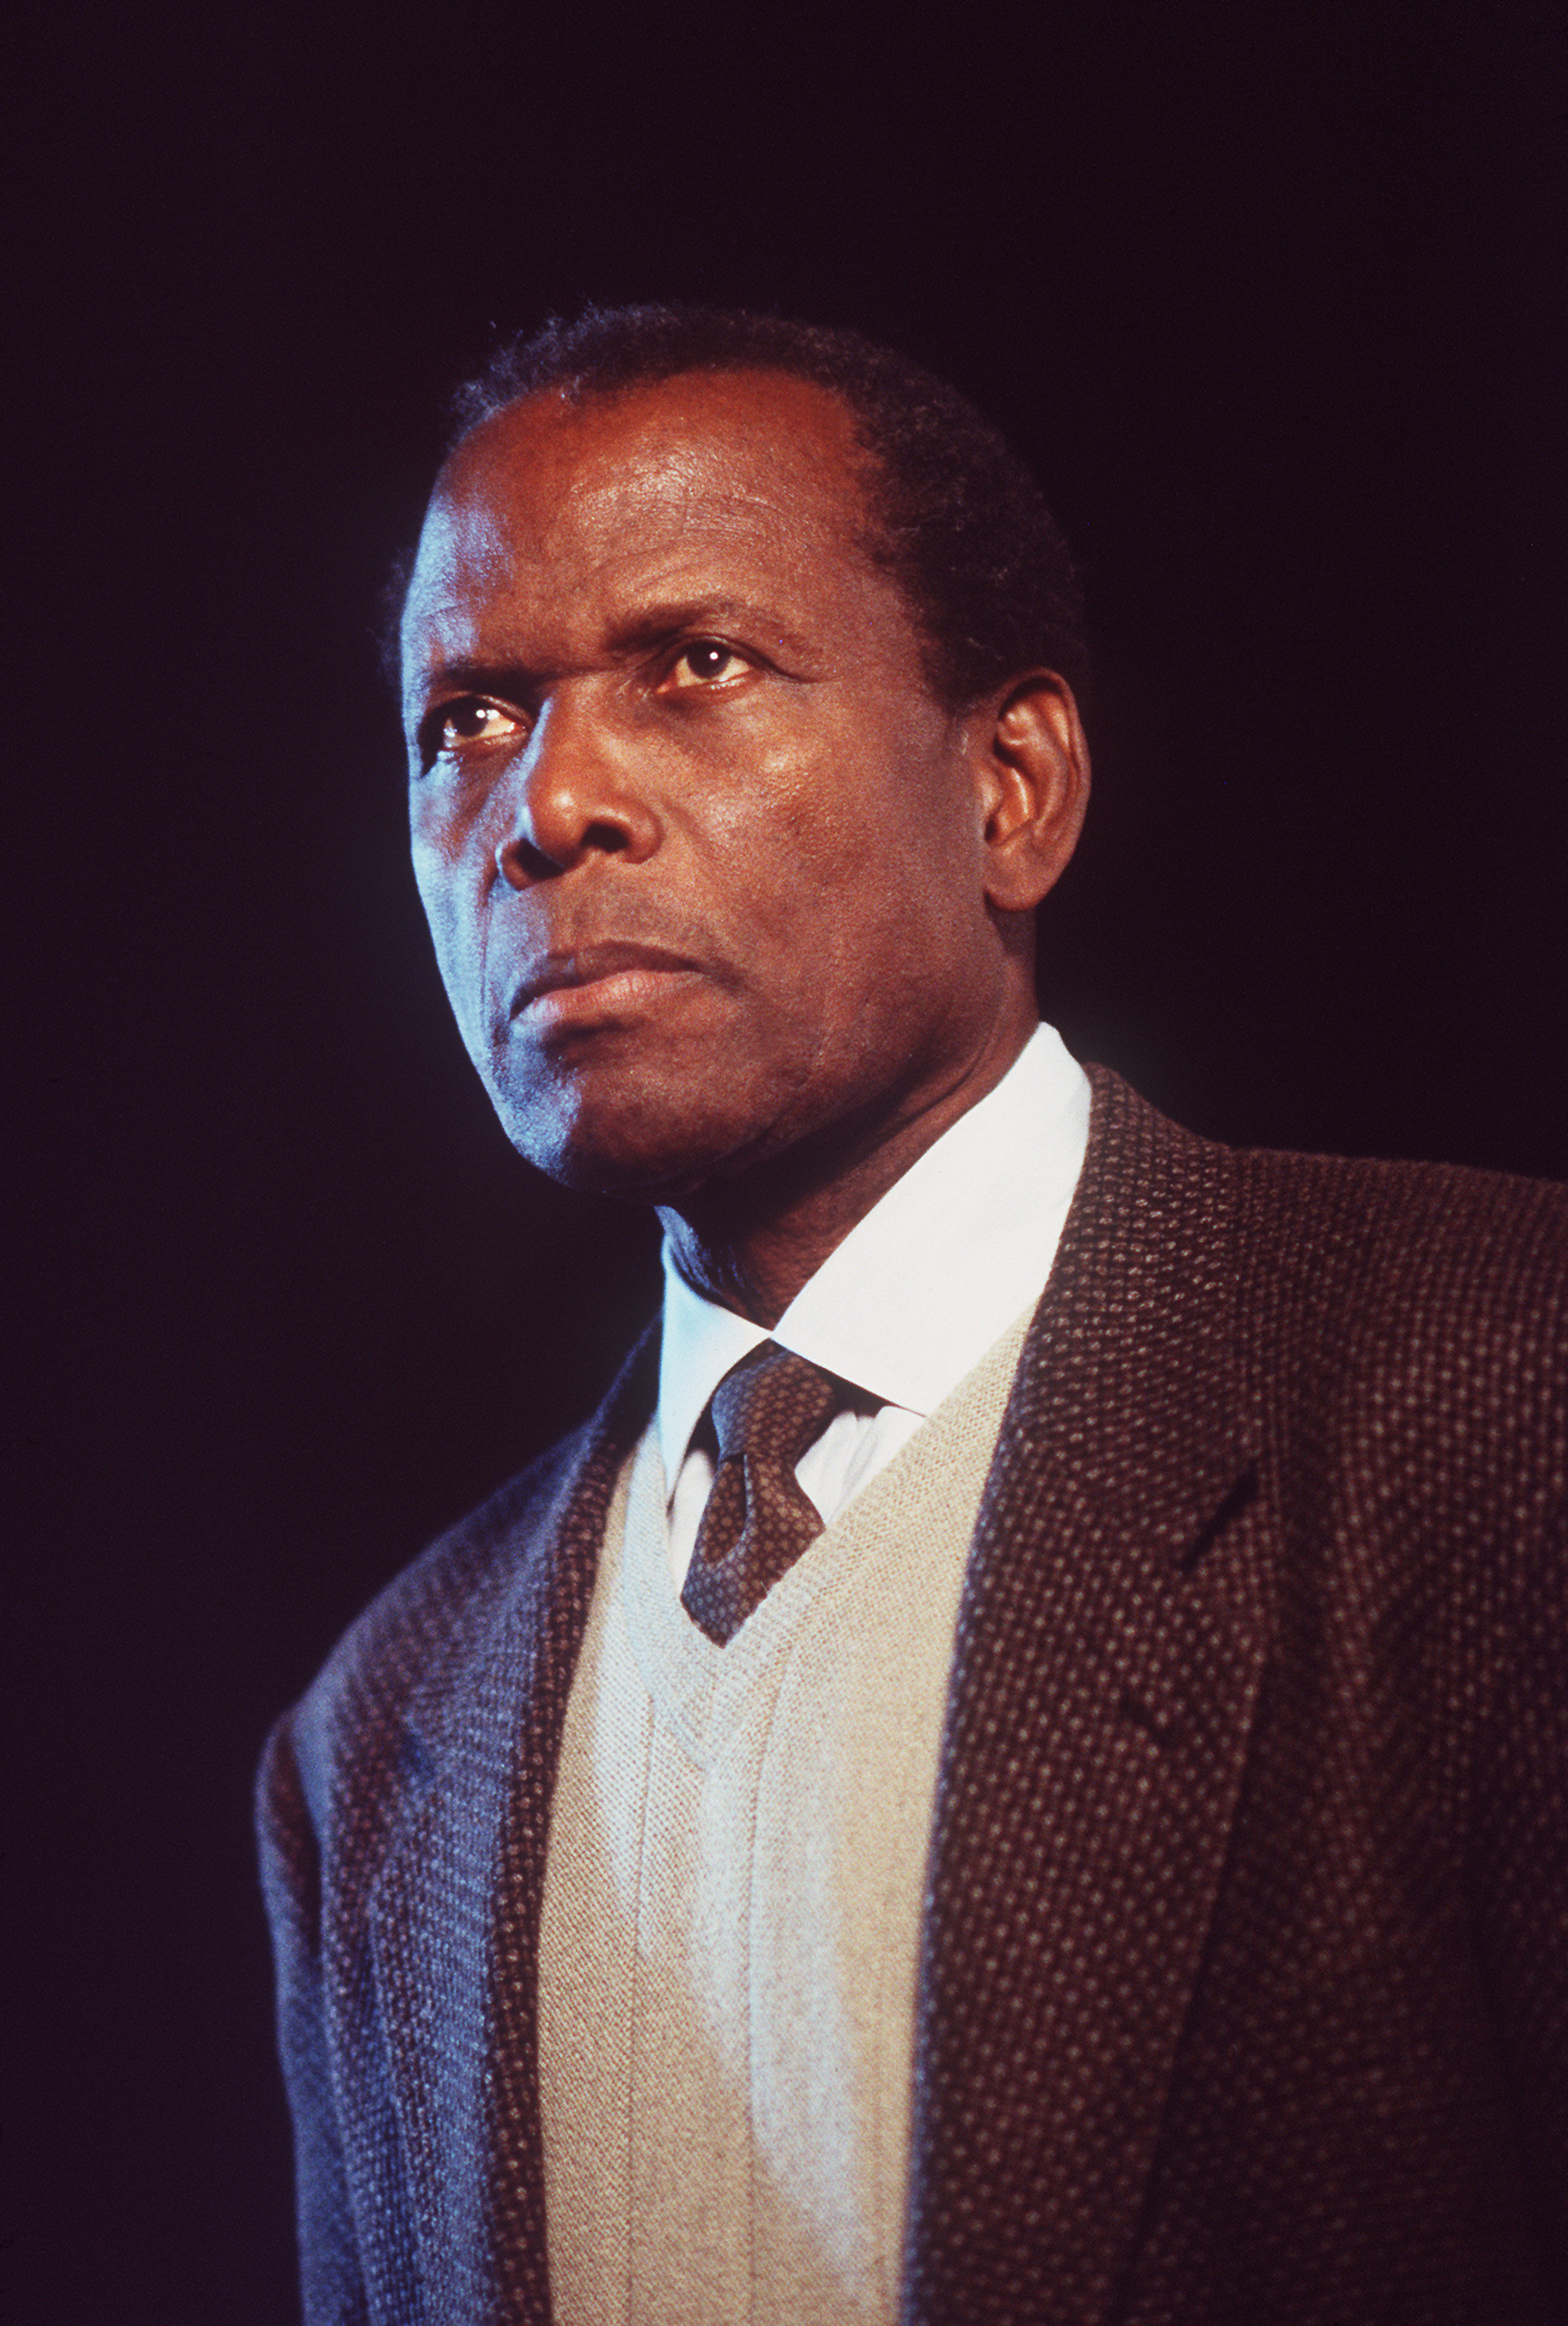 Poitier looks in the distance